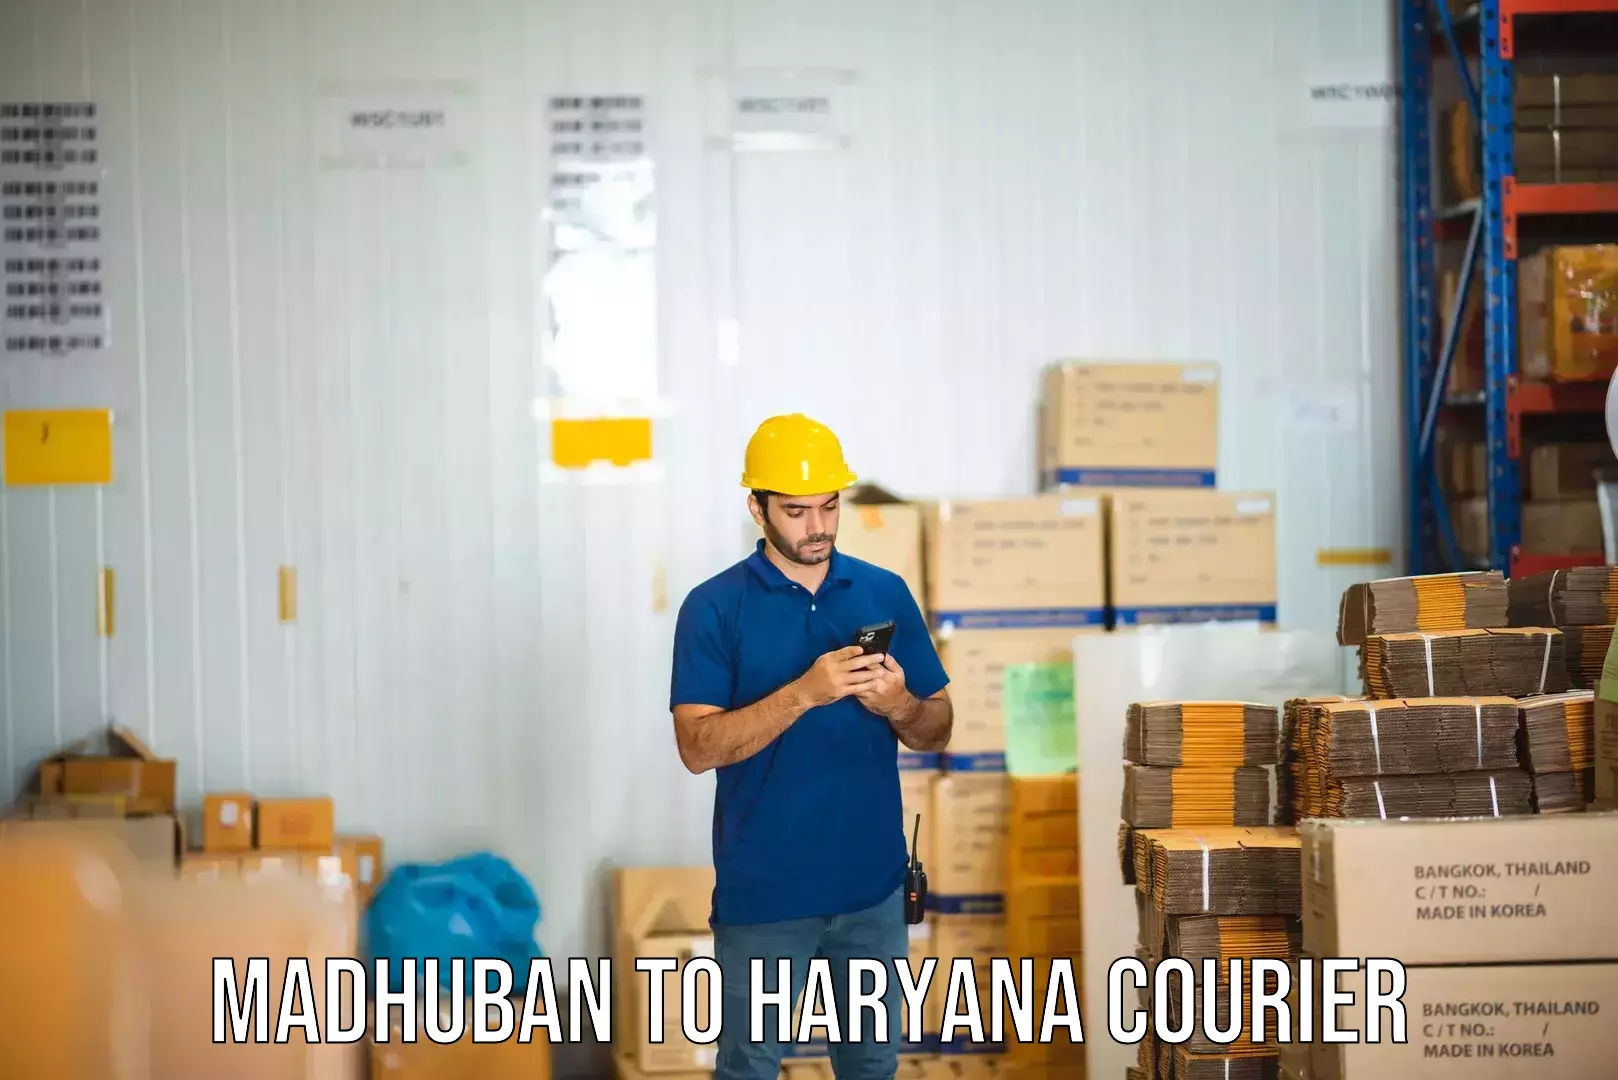 State-of-the-art courier technology Madhuban to Haryana